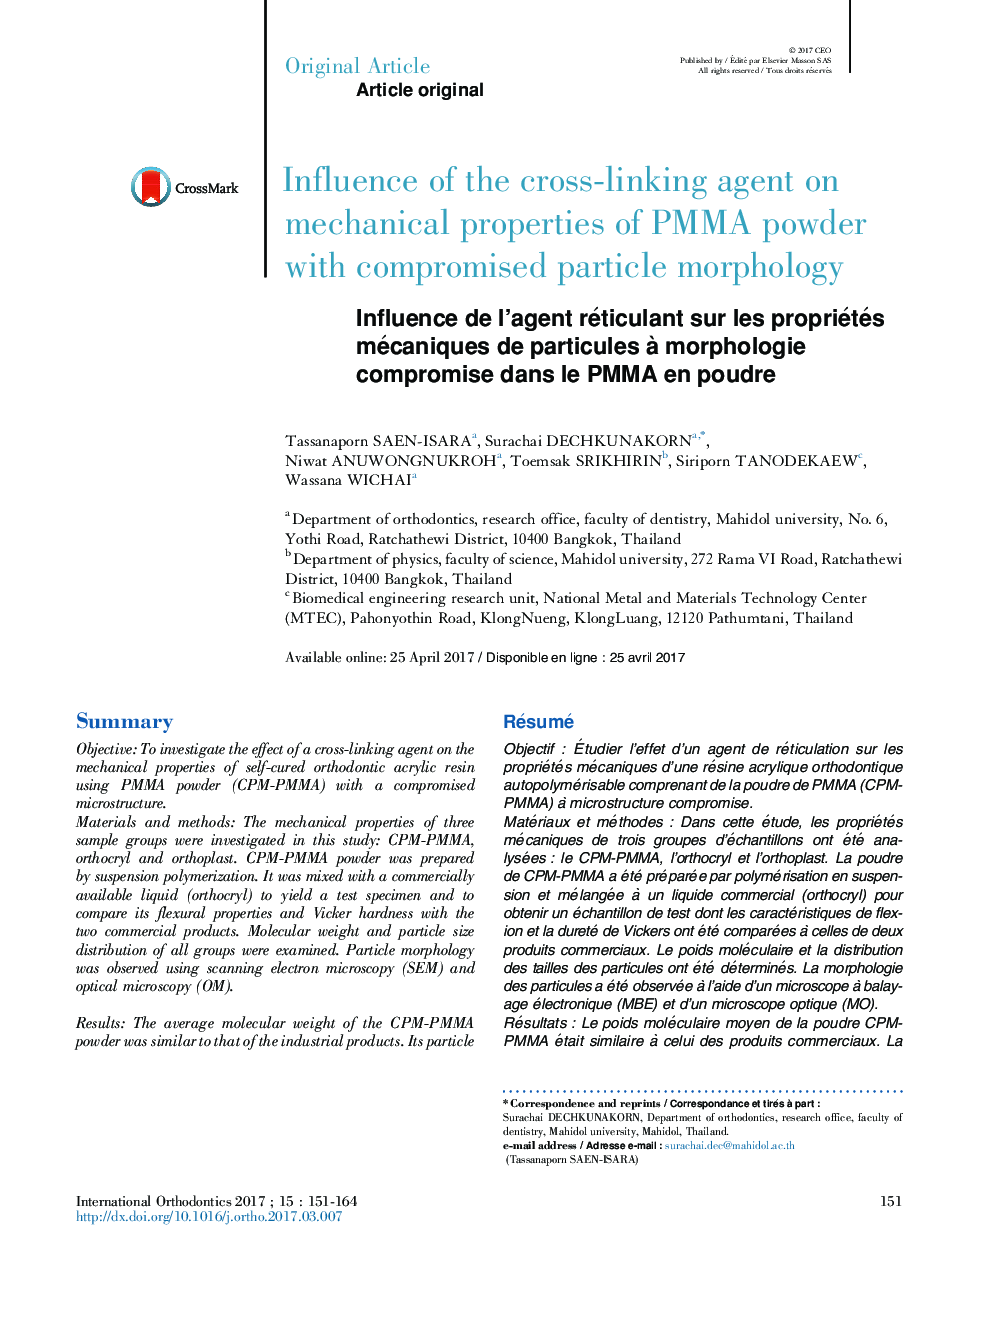 Influence of the cross-linking agent on mechanical properties of PMMA powder with compromised particle morphology